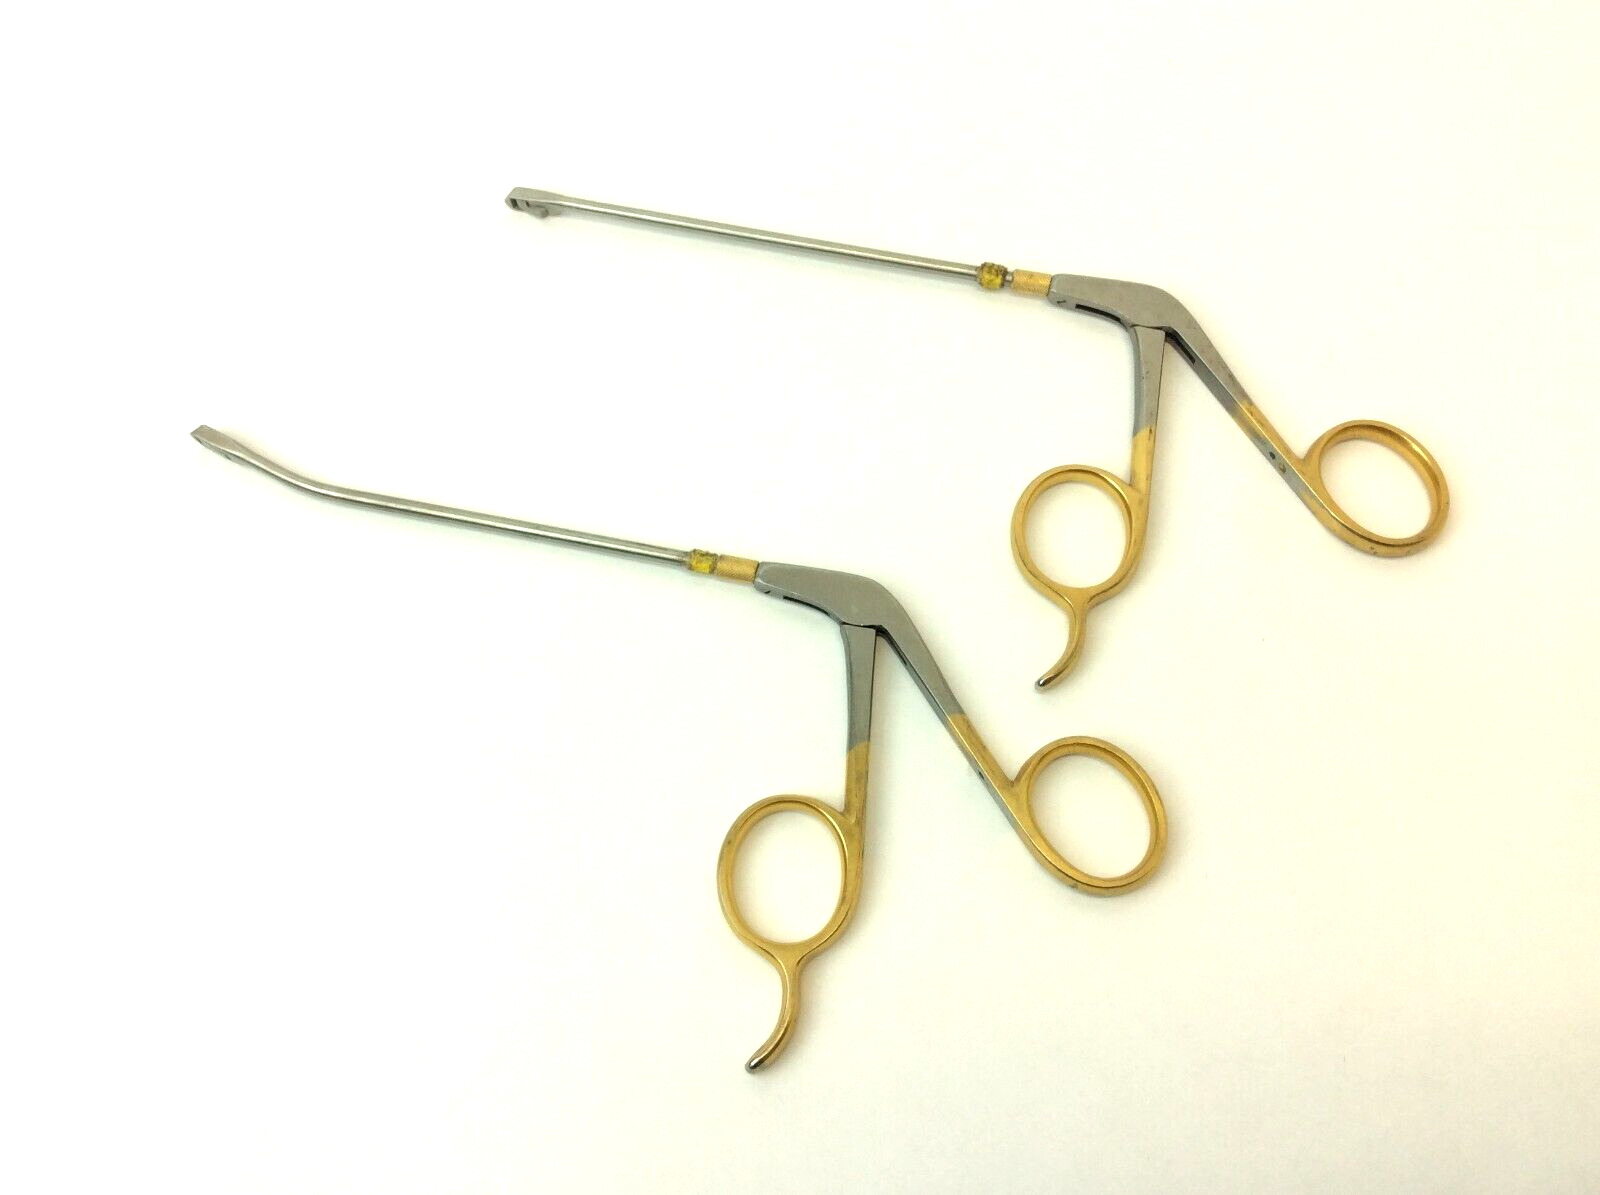 2 Vintage Decorative Grasping Forceps Angled Tools Old Unbranded Stainless Steel